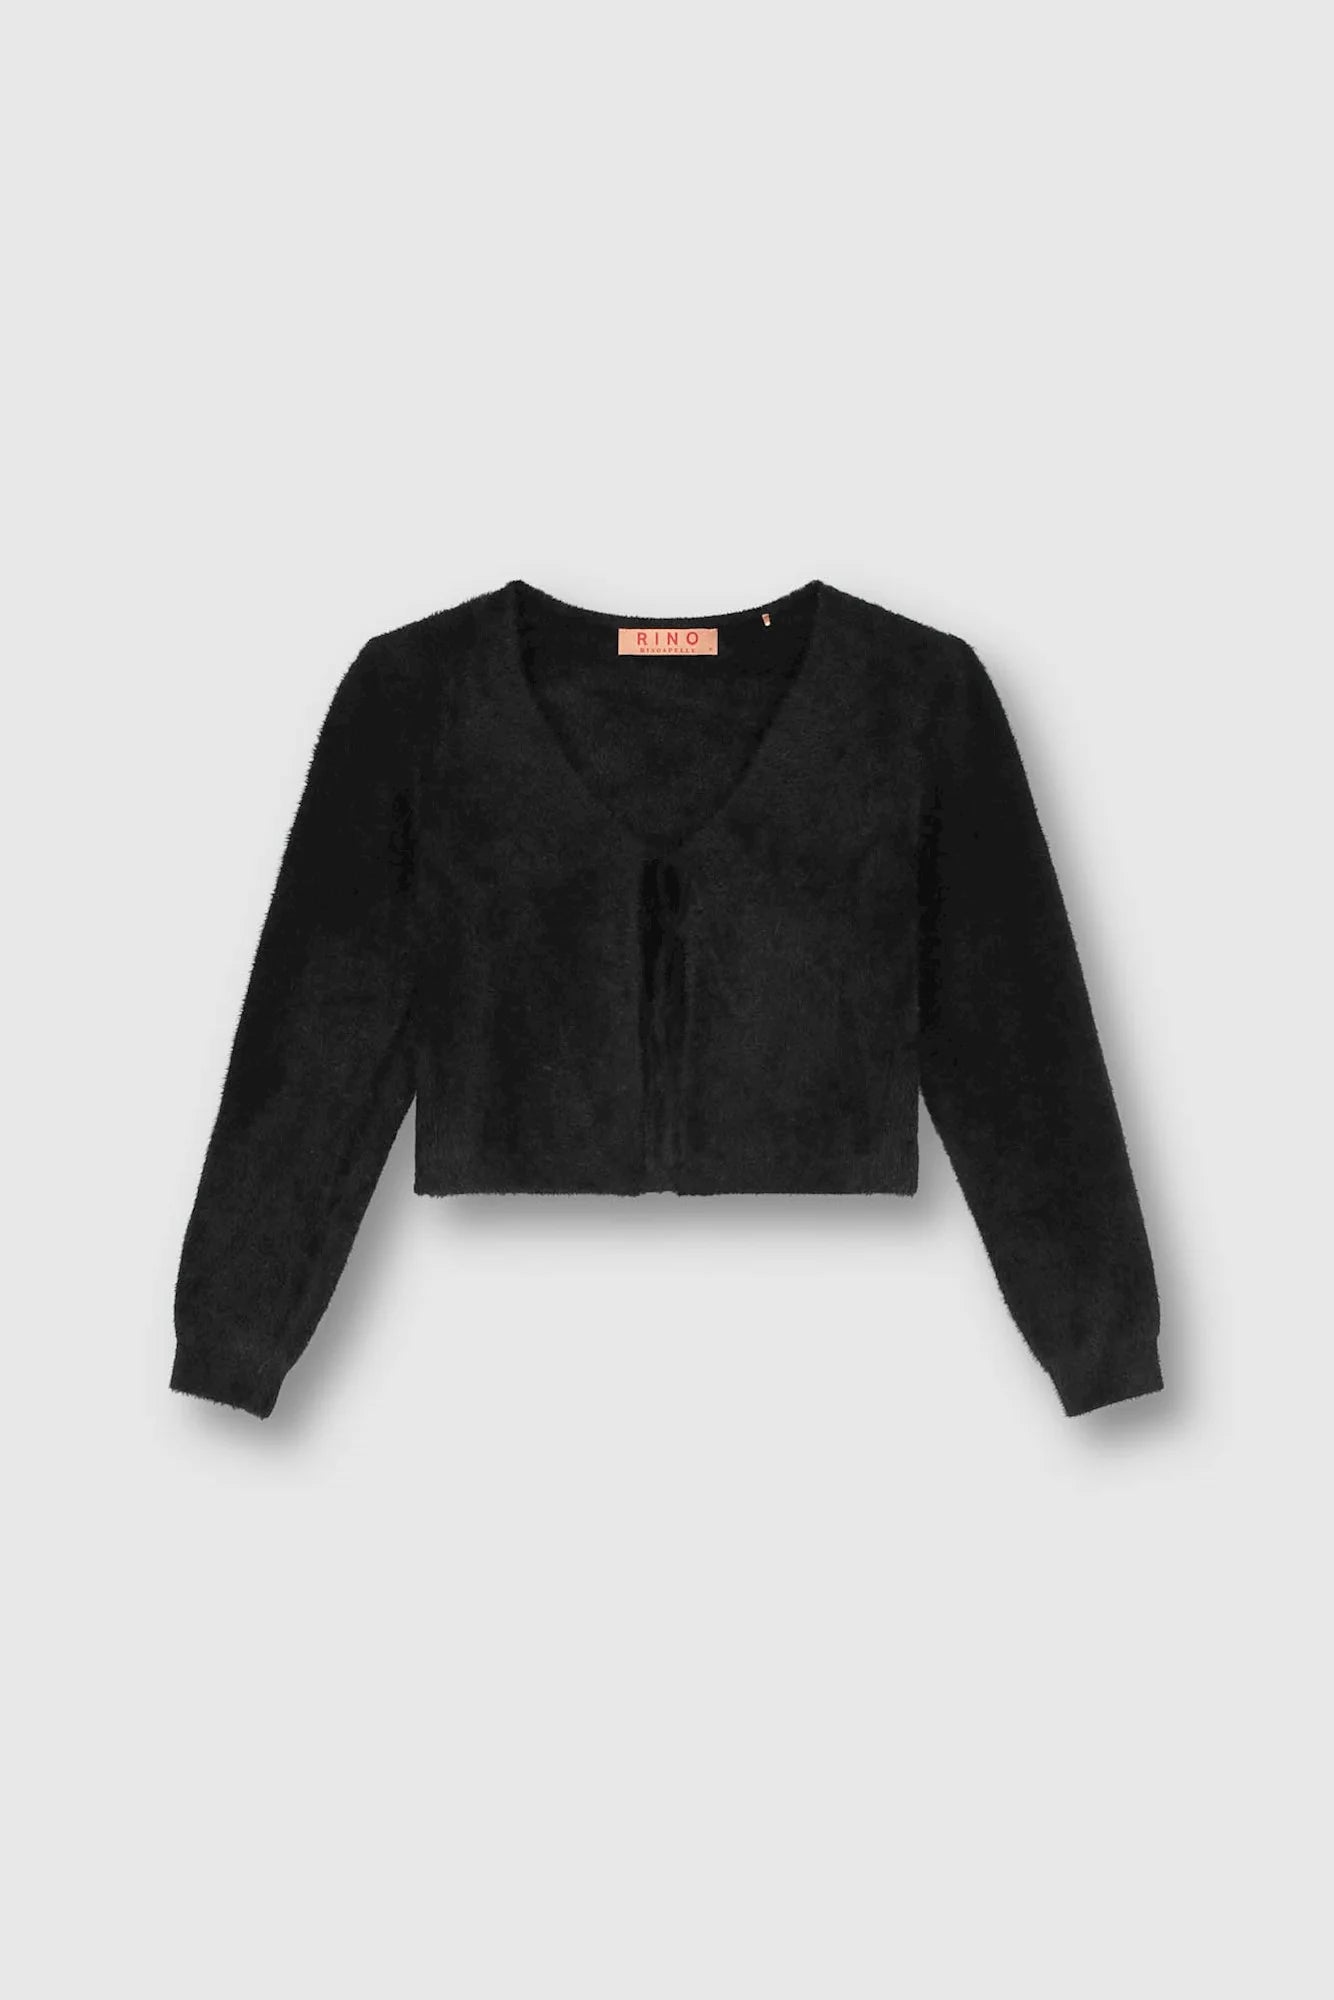 Cropped black long sleeved cardigan with tie fastening